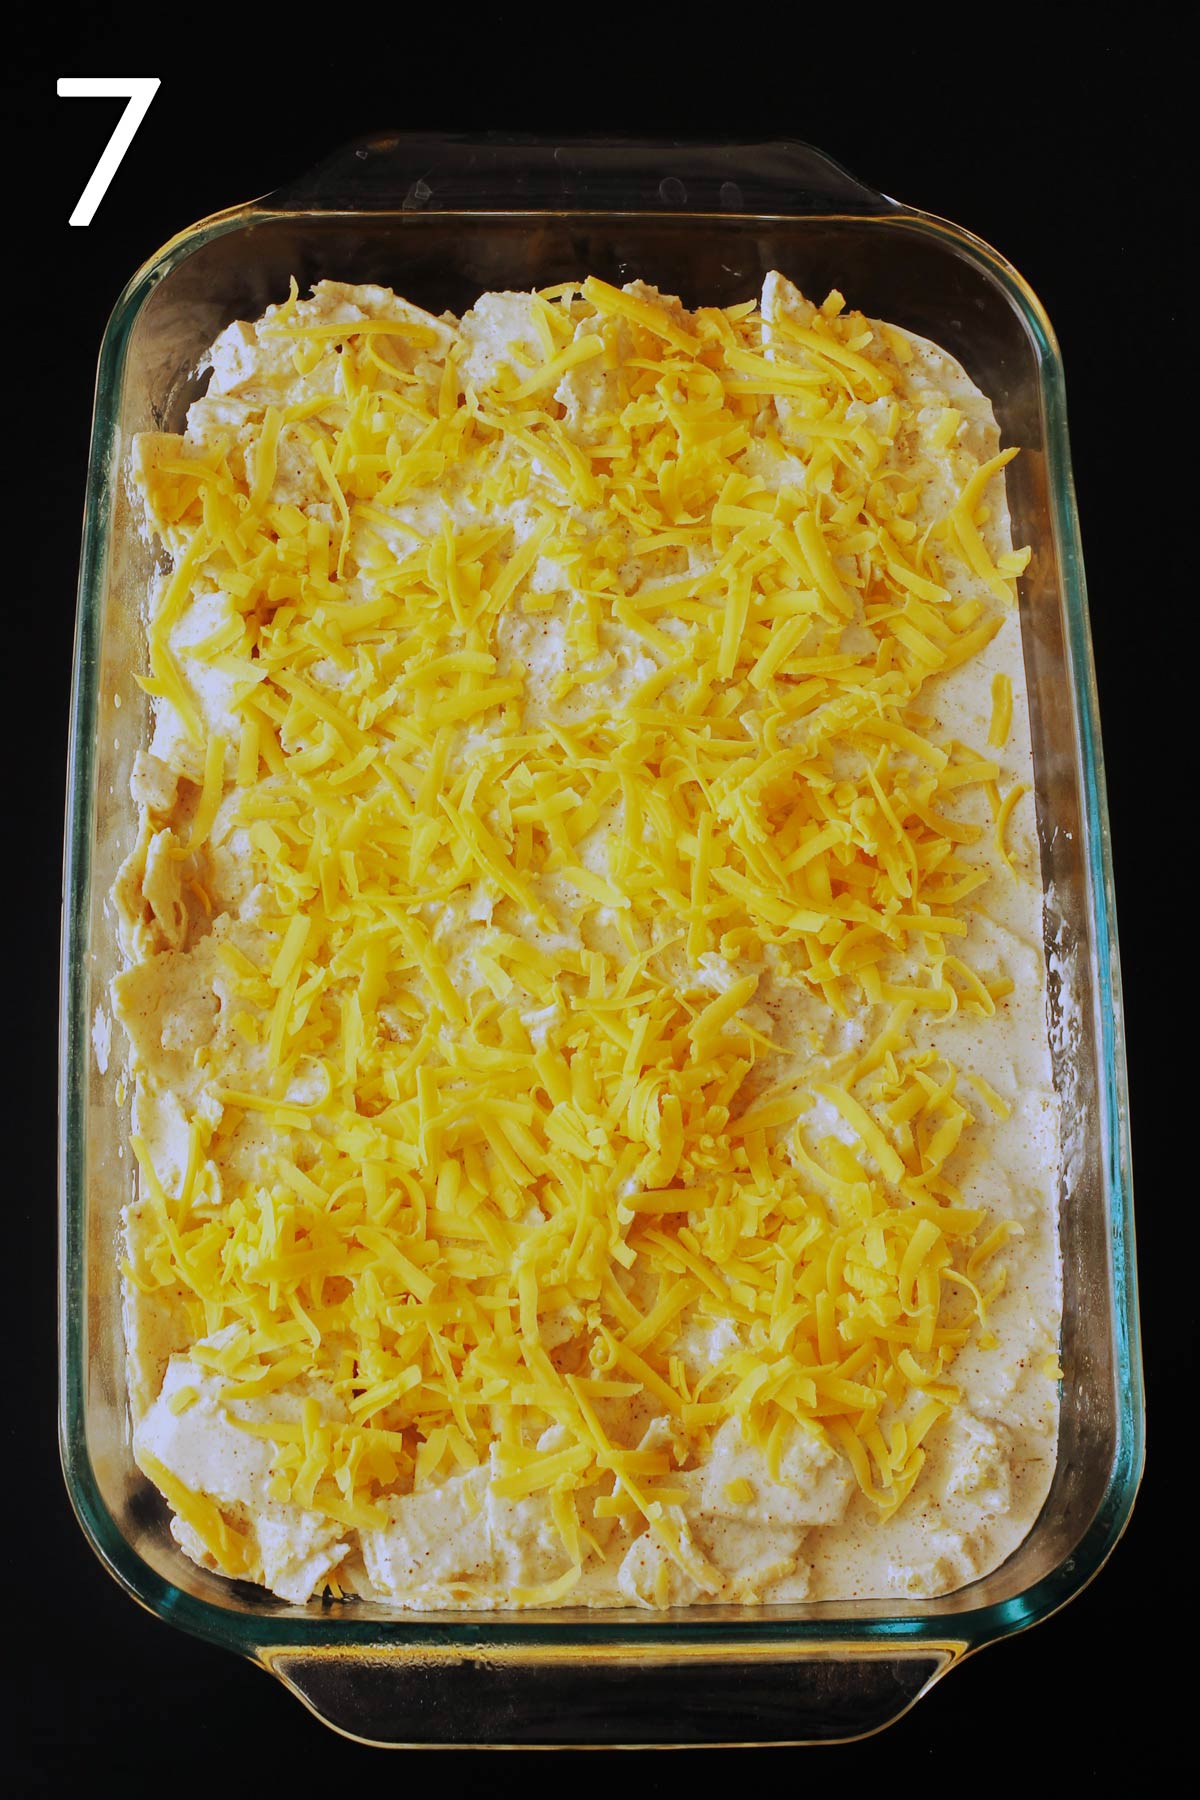 cheese sprinkled over the surface of the tortilla mixture.